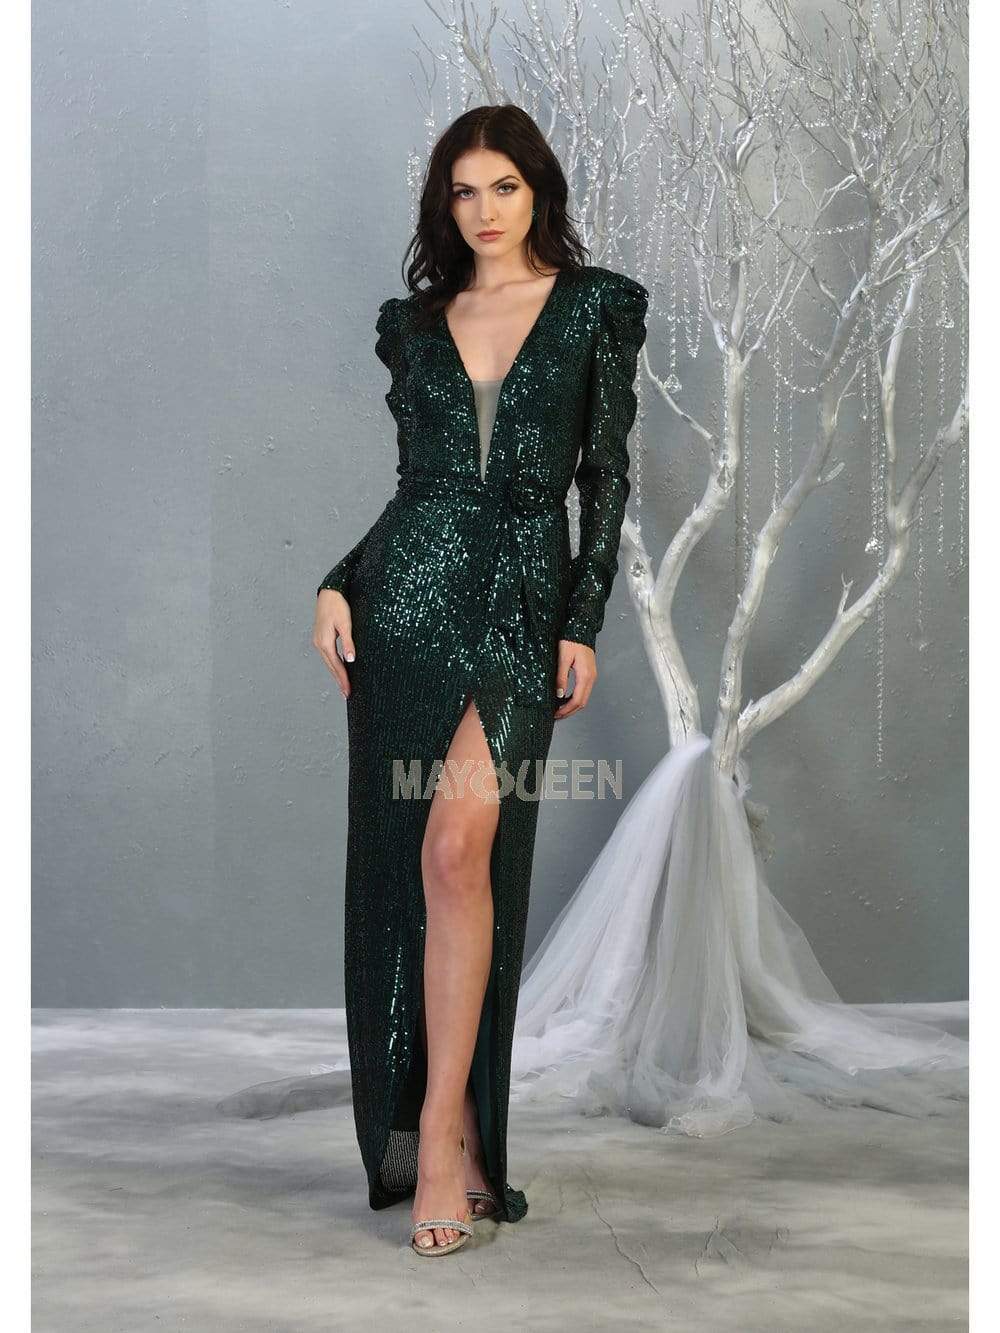 May Queen - MQ1821 Sequin Embellished Gown with Slit Evening Dresses 4 / Hunter-Grn